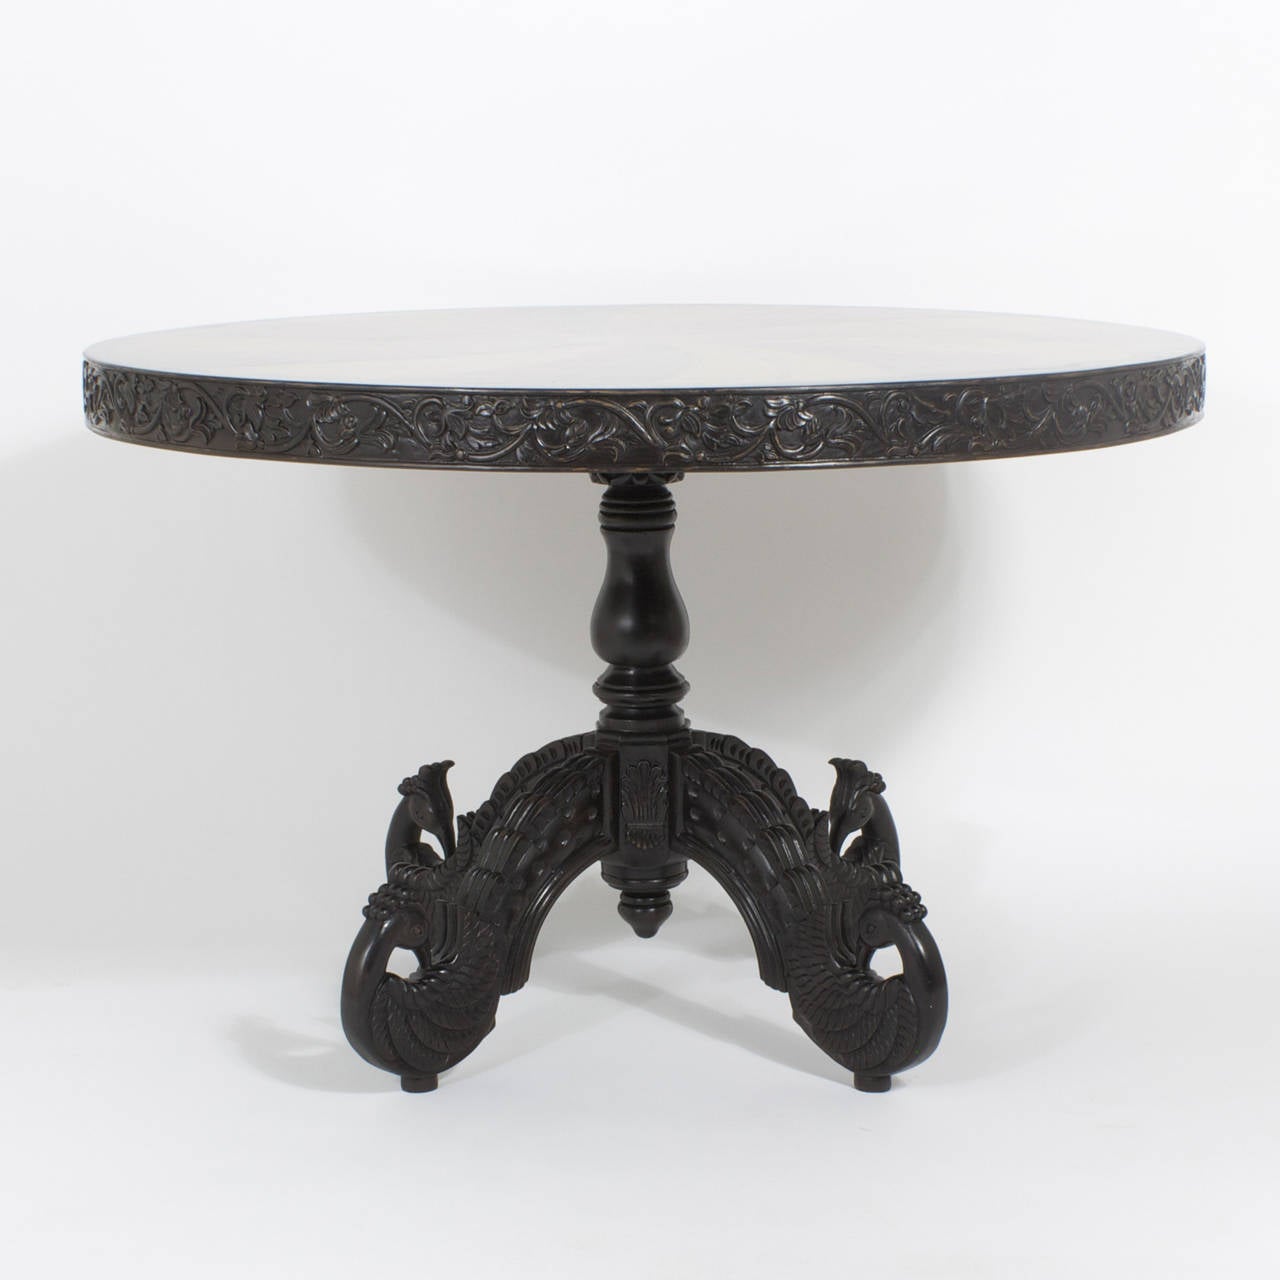 Rare and fine example of an Anglo-Indian round specimen centre table with the prerequisite exotic wood inlay in a pin wheel pattern on the top. Top band is carved wood with vines and flowers. Having a single pedestal base and four carved and splayed